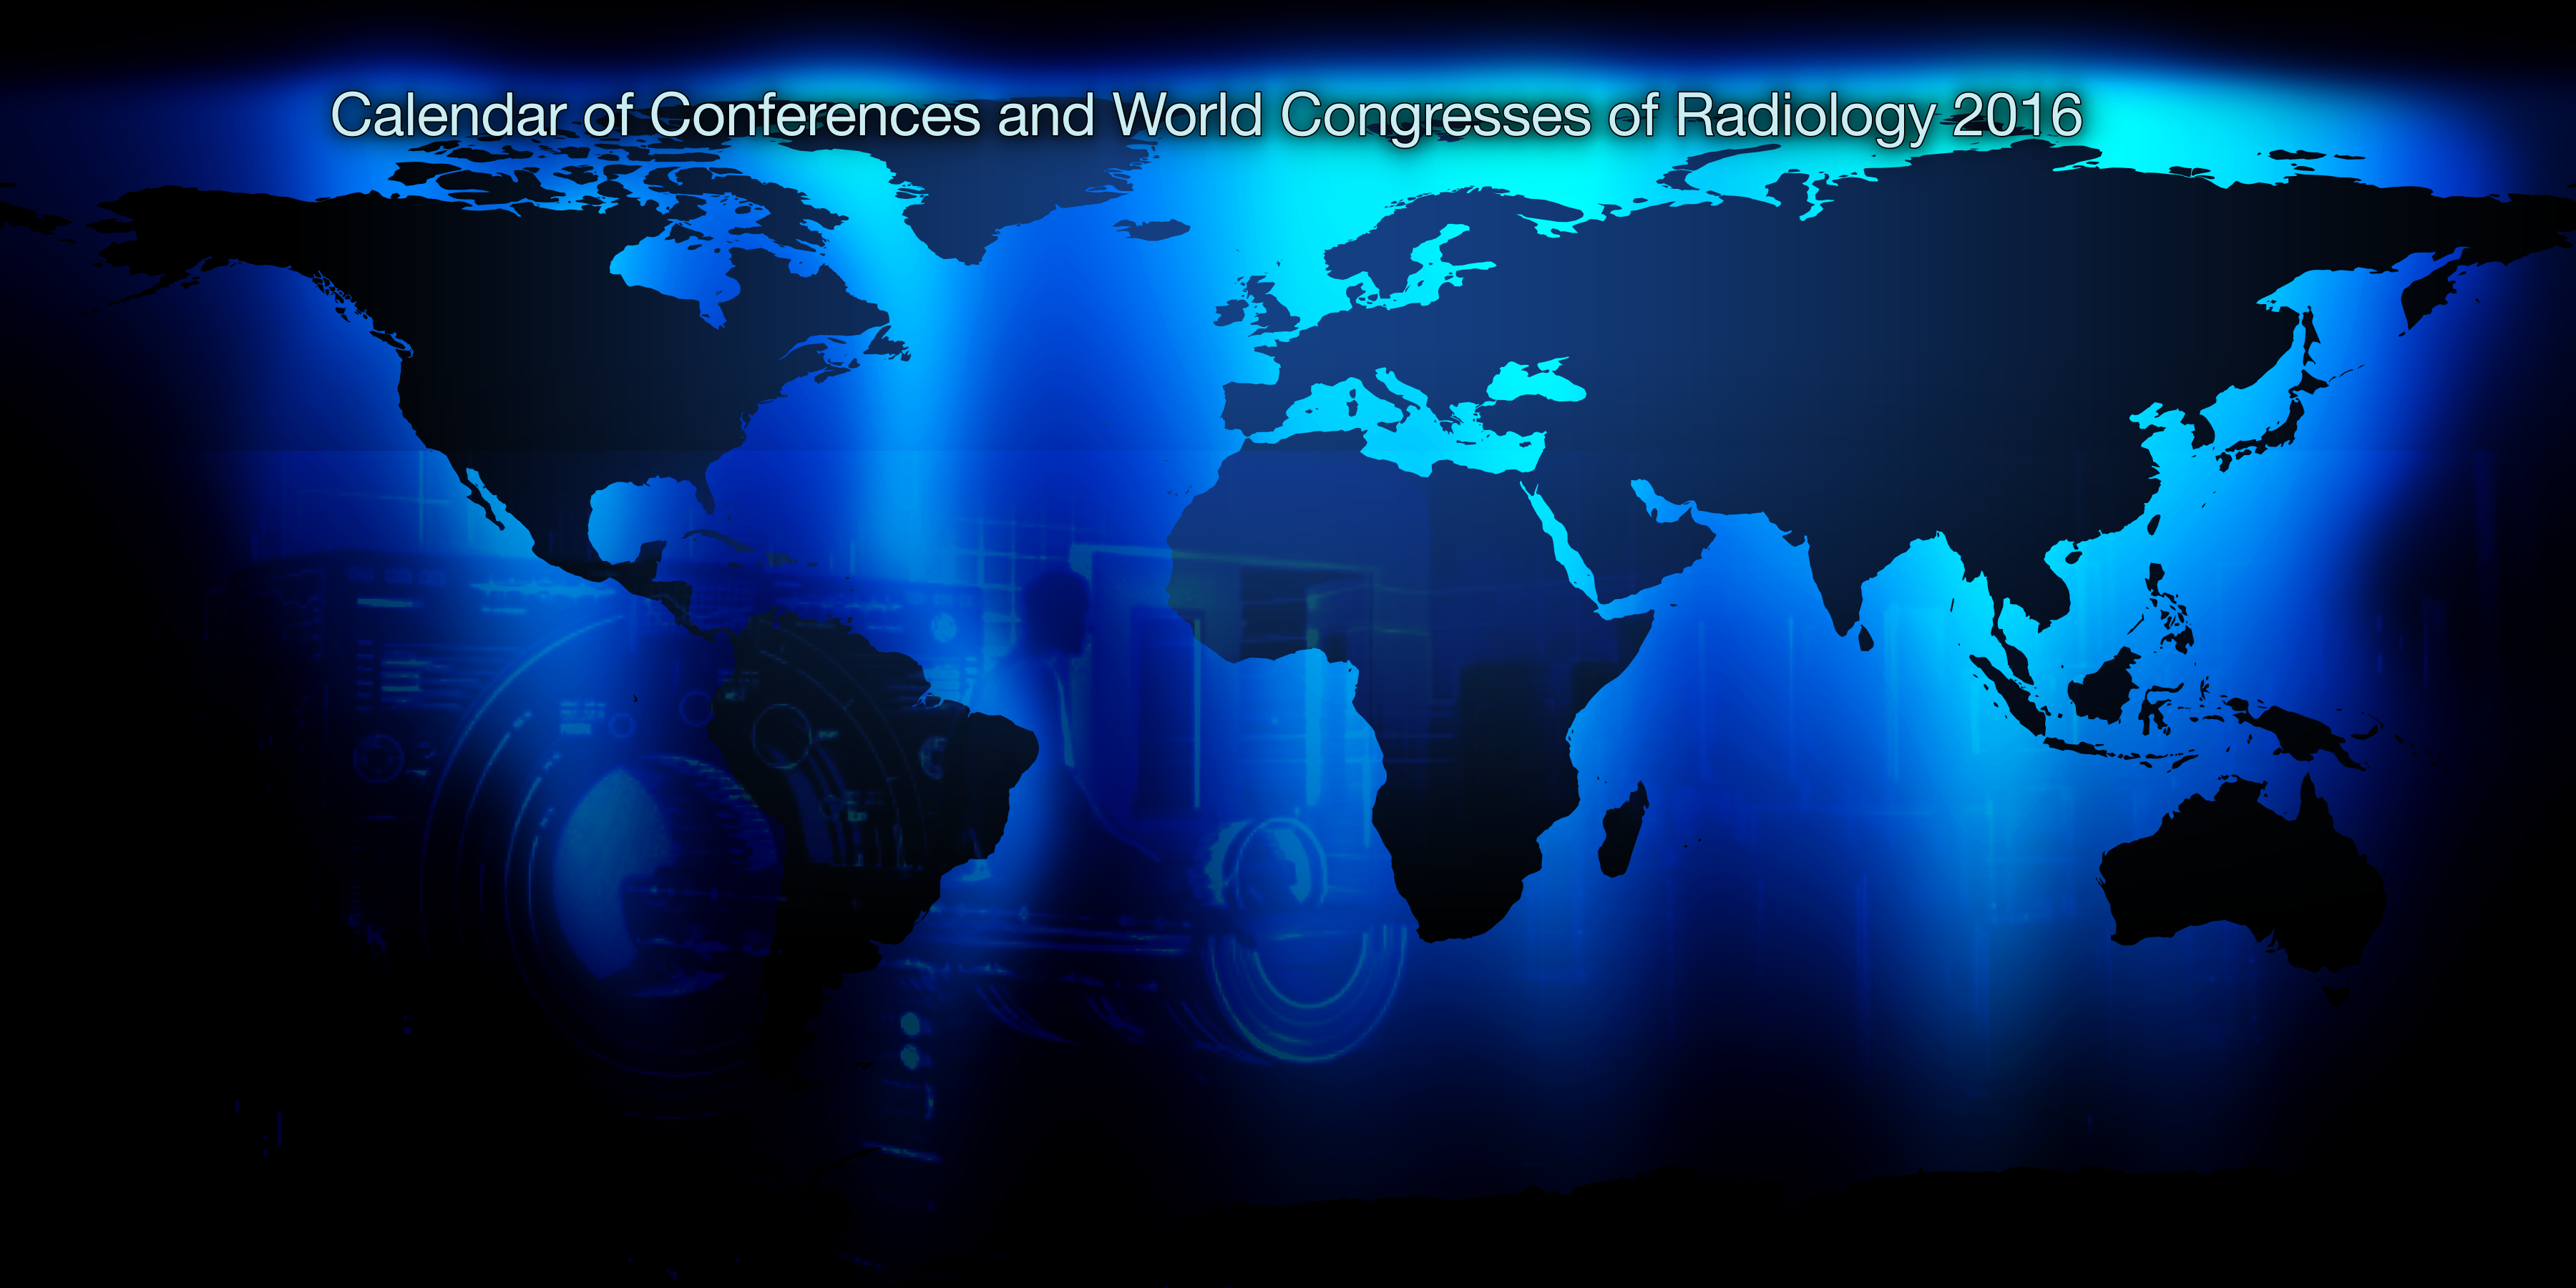 Calendar of Conferences and World Congresses of Radiology 2016.